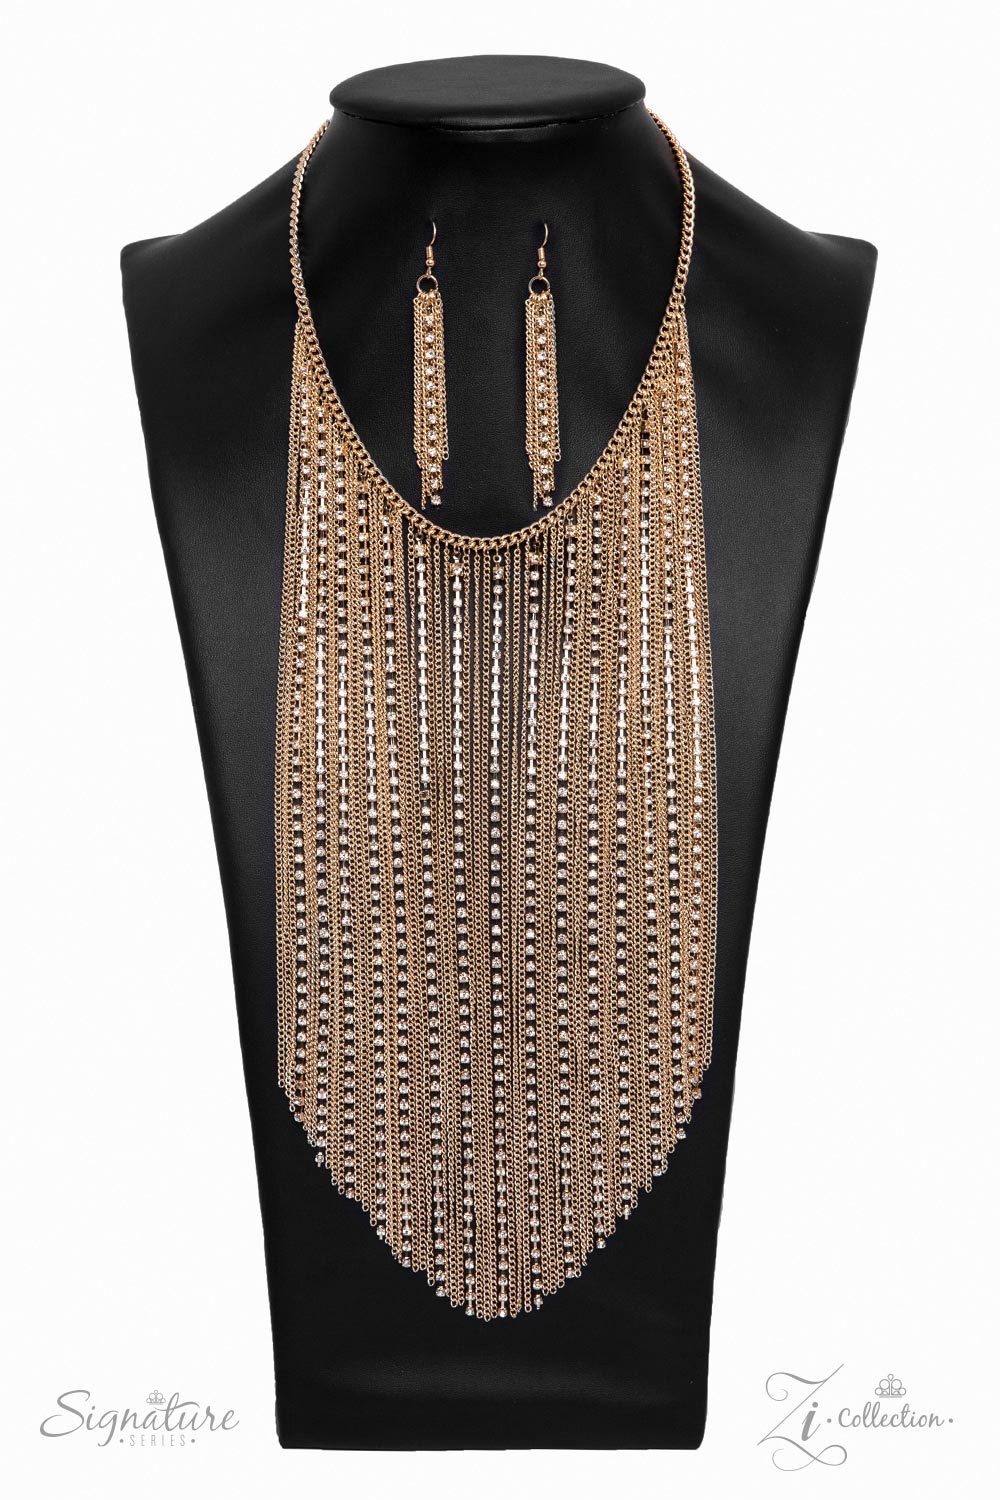 THE RAMEE - GOLD FRINGE AND RHINESTONES LONG 2019 ZI NECKLACE